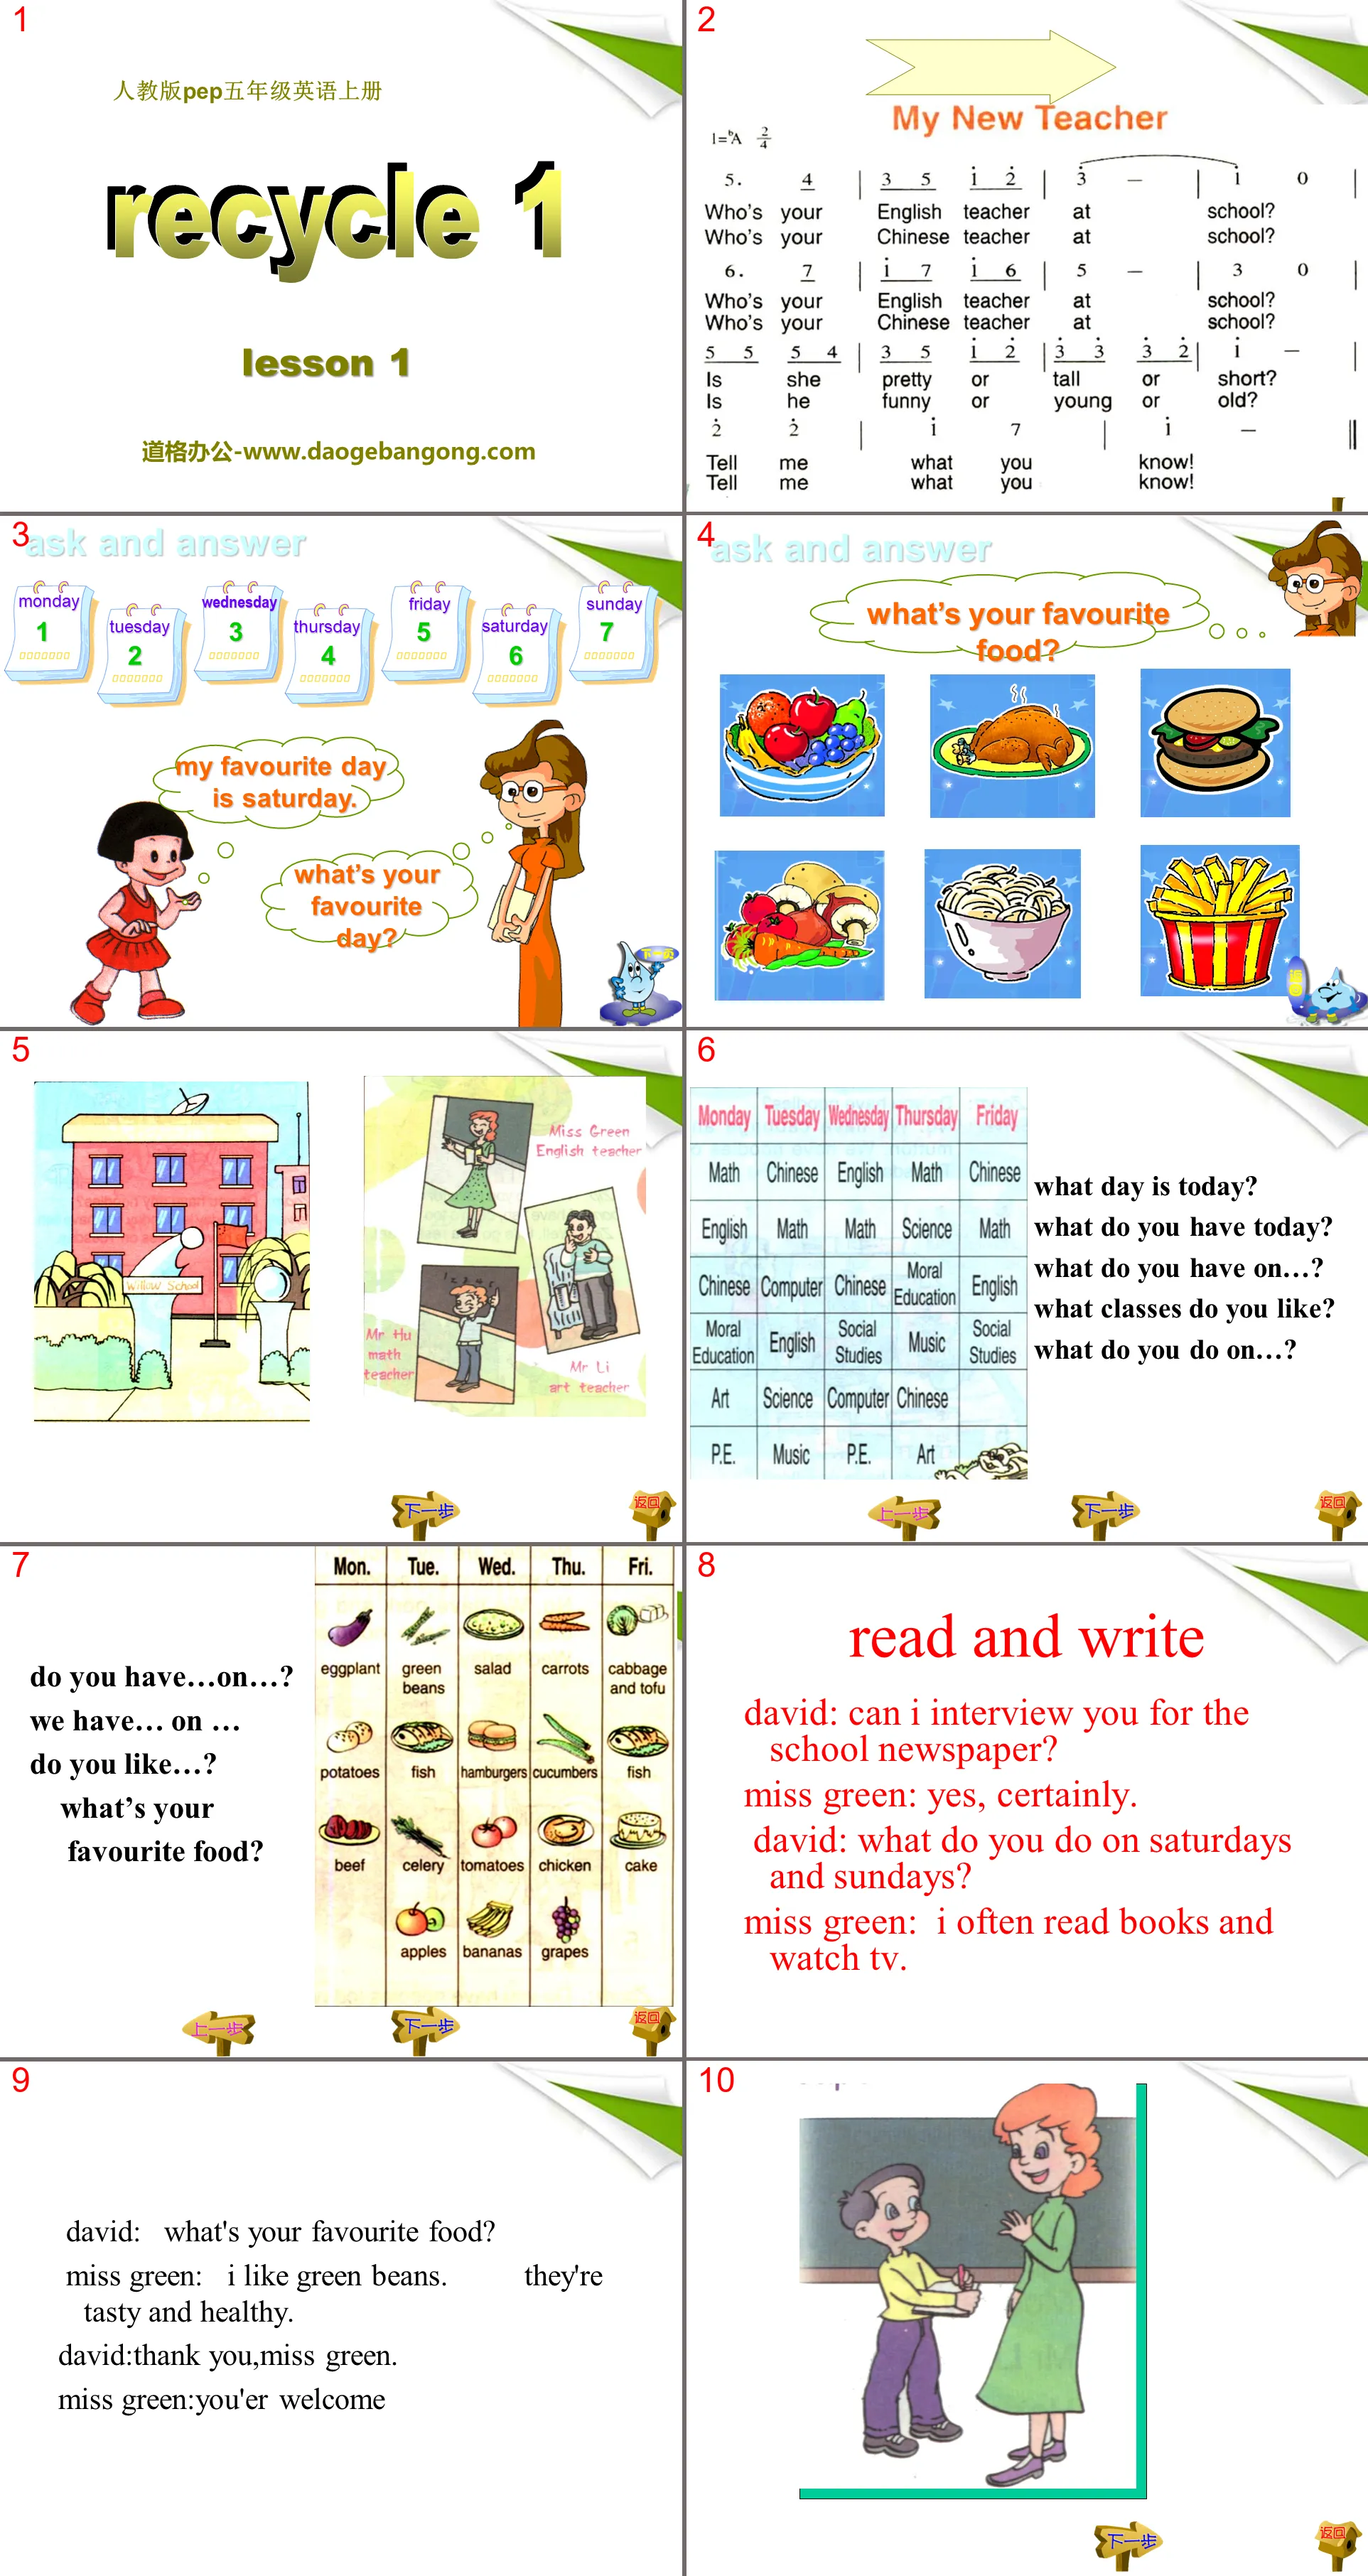 People's Education Press PEP fifth grade English volume 1 "recycle1" PPT courseware 2